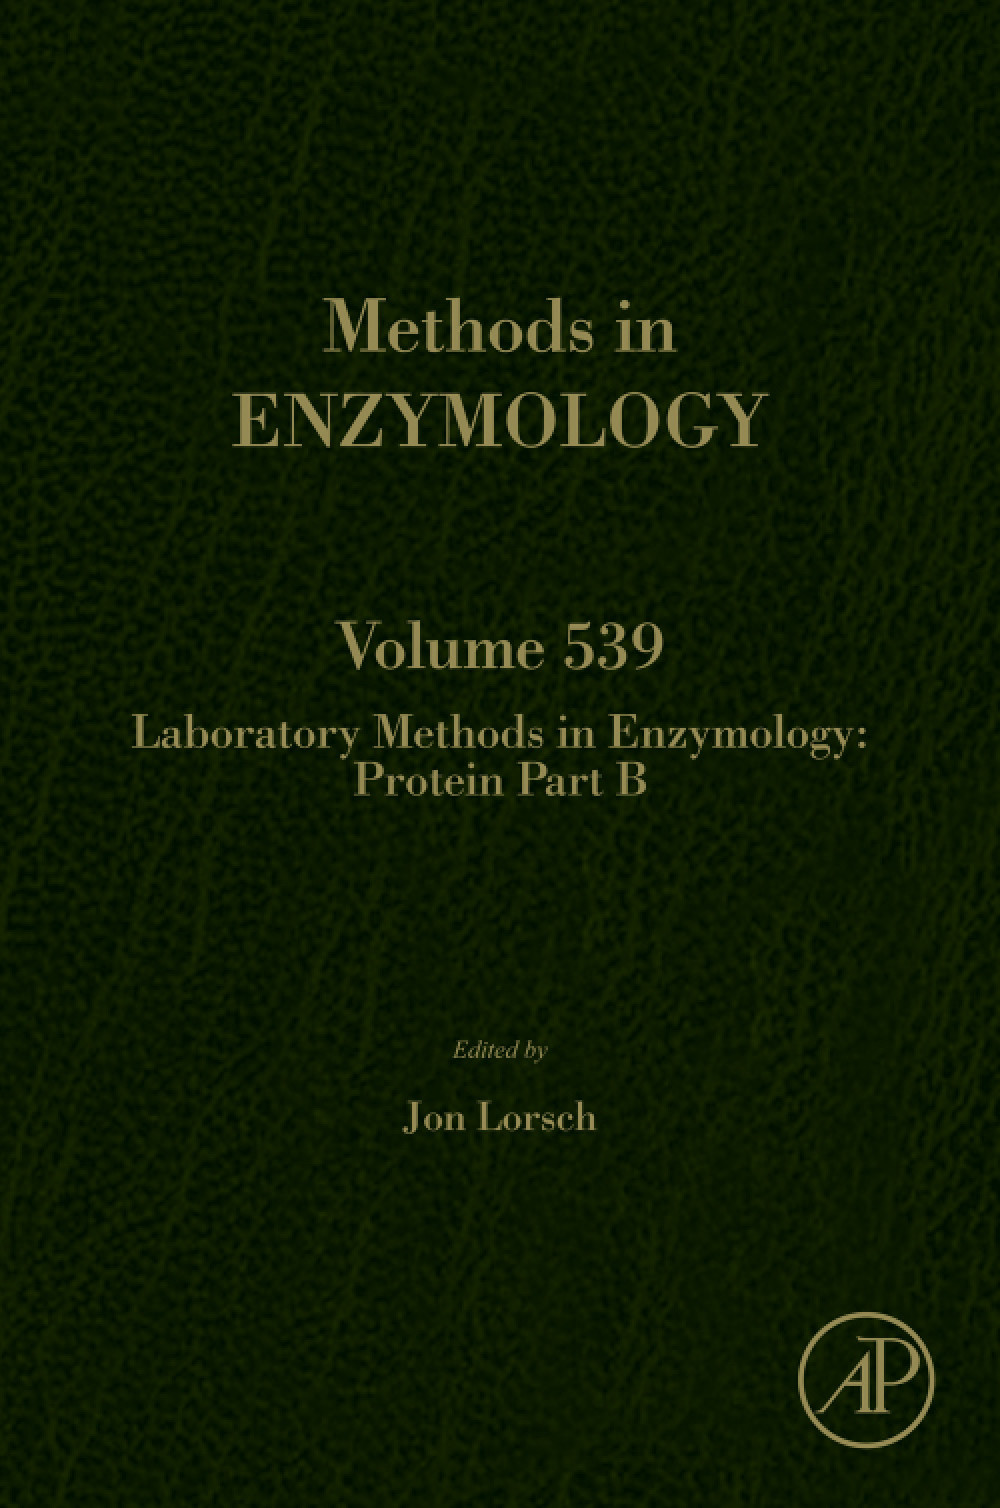 Laboratory Methods in Enzymology: Protein Part B